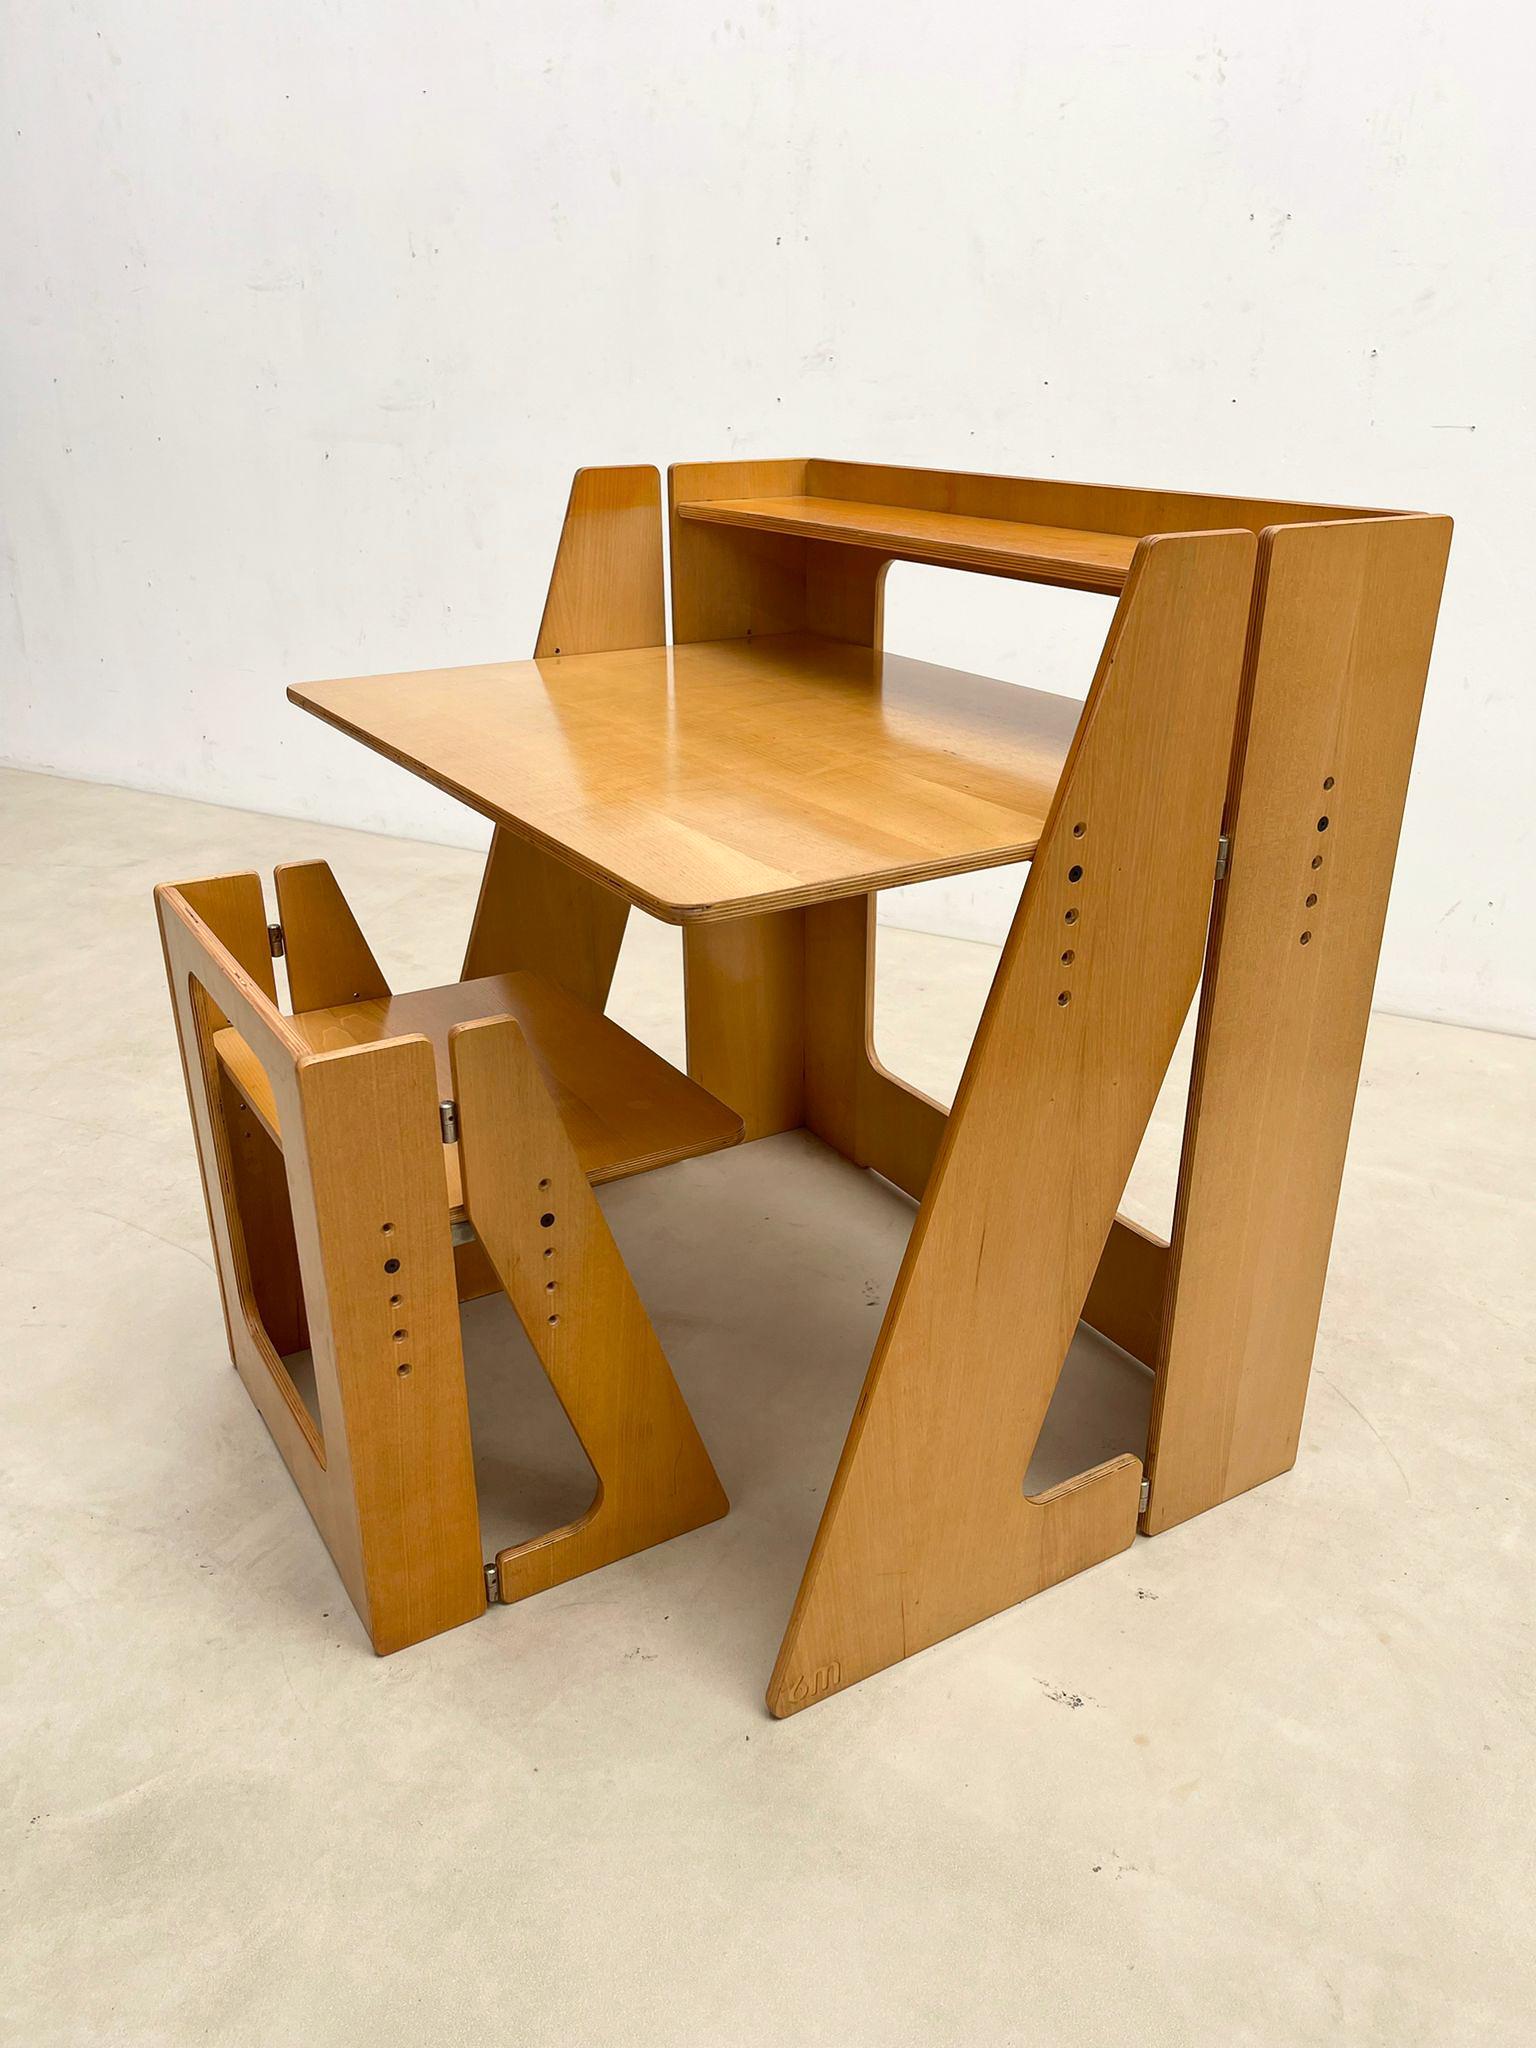 Mid-Century Modern wood foldable 6M desk and chair, Italy, 1960s

Measures: Chair : 55 x 50 x 36cm
Seat height : 40cm.